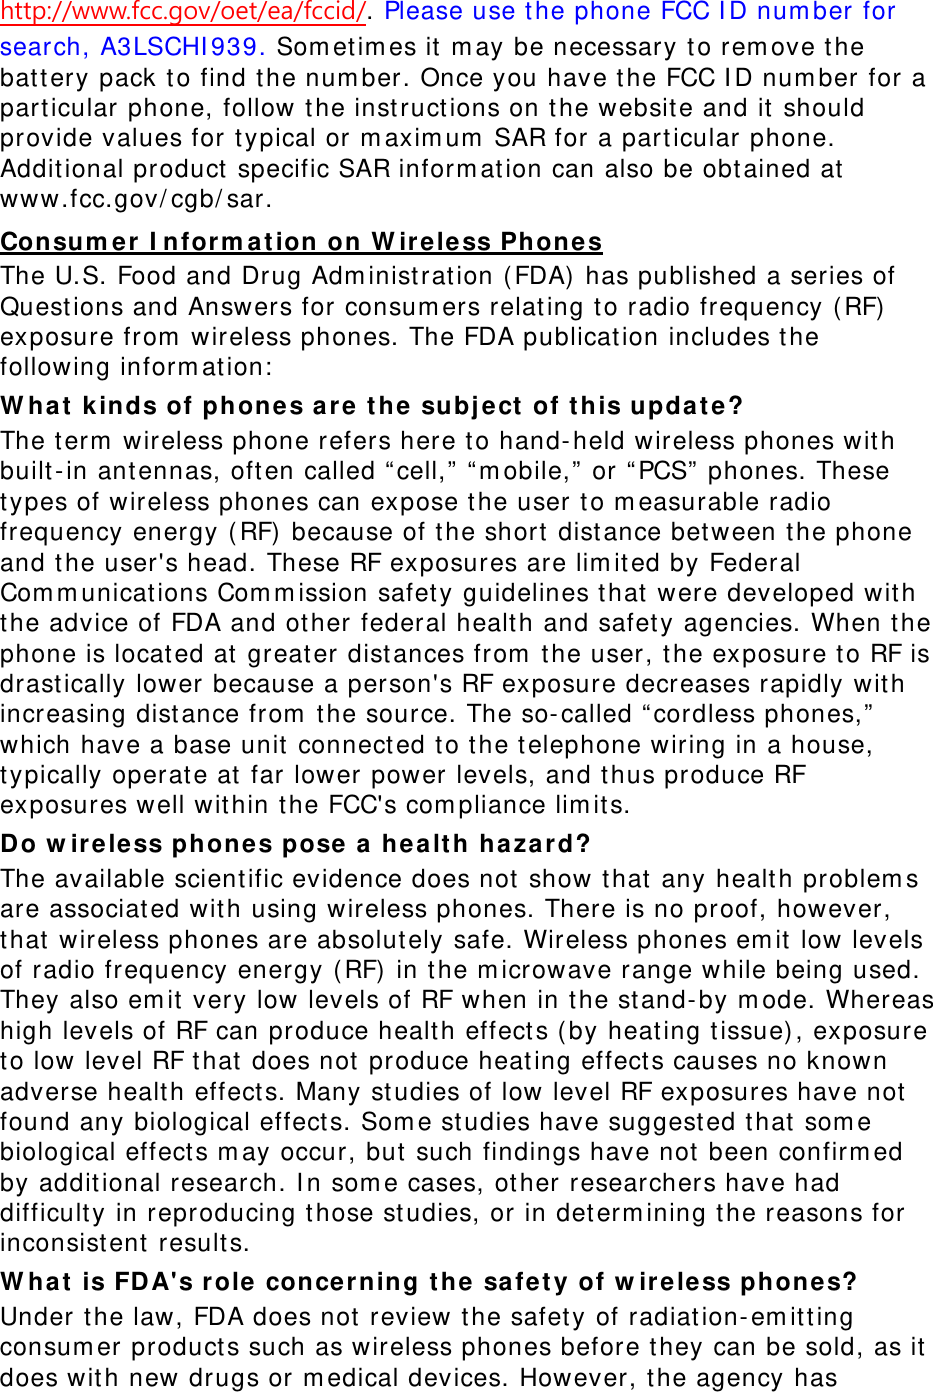 http://www.fcc.gov/oet/ea/fccid/. Please use the phone FCC ID number for search, A3LSCHI939. Sometimes it may be necessary to remove the battery pack to find the number. Once you have the FCC ID number for a particular phone, follow the instructions on the website and it should provide values for typical or maximum SAR for a particular phone. Additional product specific SAR information can also be obtained at www.fcc.gov/cgb/sar. Consumer Information on Wireless Phones The U.S. Food and Drug Administration (FDA) has published a series of Questions and Answers for consumers relating to radio frequency (RF) exposure from wireless phones. The FDA publication includes the following information: What kinds of phones are the subject of this update? The term wireless phone refers here to hand-held wireless phones with built-in antennas, often called “cell,” “mobile,” or “PCS” phones. These types of wireless phones can expose the user to measurable radio frequency energy (RF) because of the short distance between the phone and the user&apos;s head. These RF exposures are limited by Federal Communications Commission safety guidelines that were developed with the advice of FDA and other federal health and safety agencies. When the phone is located at greater distances from the user, the exposure to RF is drastically lower because a person&apos;s RF exposure decreases rapidly with increasing distance from the source. The so-called “cordless phones,” which have a base unit connected to the telephone wiring in a house, typically operate at far lower power levels, and thus produce RF exposures well within the FCC&apos;s compliance limits. Do wireless phones pose a health hazard? The available scientific evidence does not show that any health problems are associated with using wireless phones. There is no proof, however, that wireless phones are absolutely safe. Wireless phones emit low levels of radio frequency energy (RF) in the microwave range while being used. They also emit very low levels of RF when in the stand-by mode. Whereas high levels of RF can produce health effects (by heating tissue), exposure to low level RF that does not produce heating effects causes no known adverse health effects. Many studies of low level RF exposures have not found any biological effects. Some studies have suggested that some biological effects may occur, but such findings have not been confirmed by additional research. In some cases, other researchers have had difficulty in reproducing those studies, or in determining the reasons for inconsistent results. What is FDA&apos;s role concerning the safety of wireless phones? Under the law, FDA does not review the safety of radiation-emitting consumer products such as wireless phones before they can be sold, as it does with new drugs or medical devices. However, the agency has 